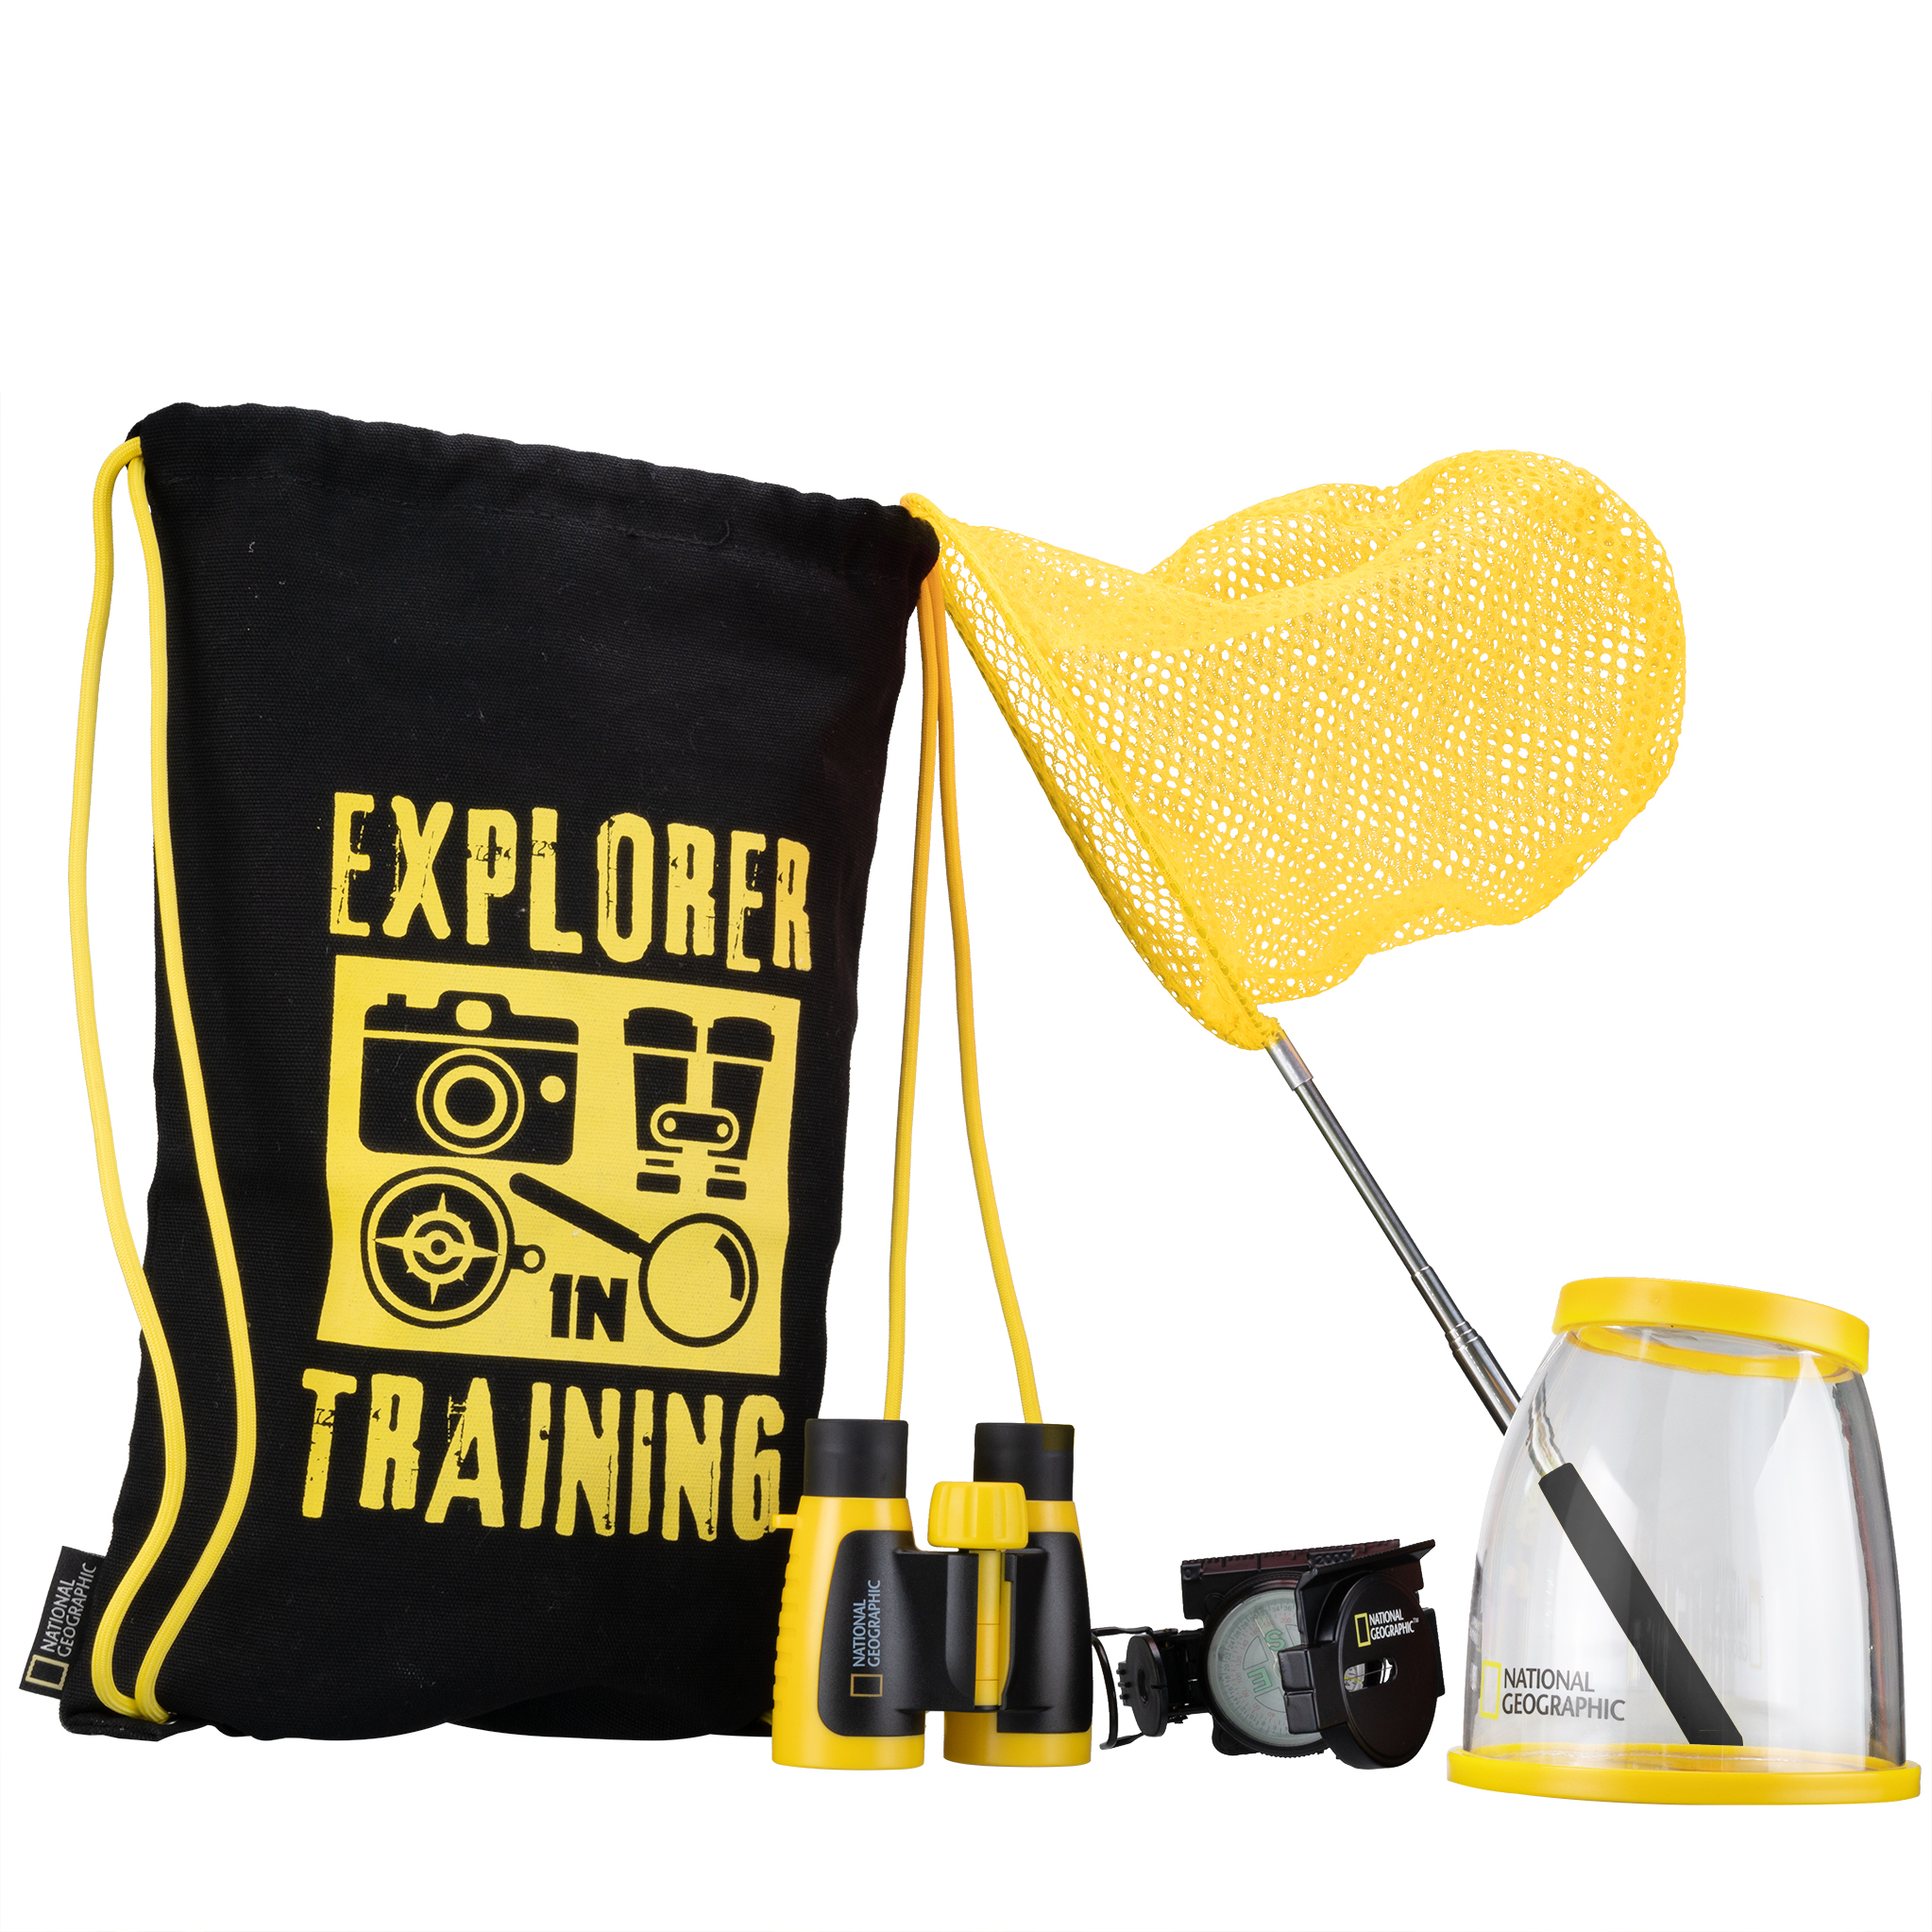 NATIONAL GEOGRAPHIC Outdoor Discovery Set